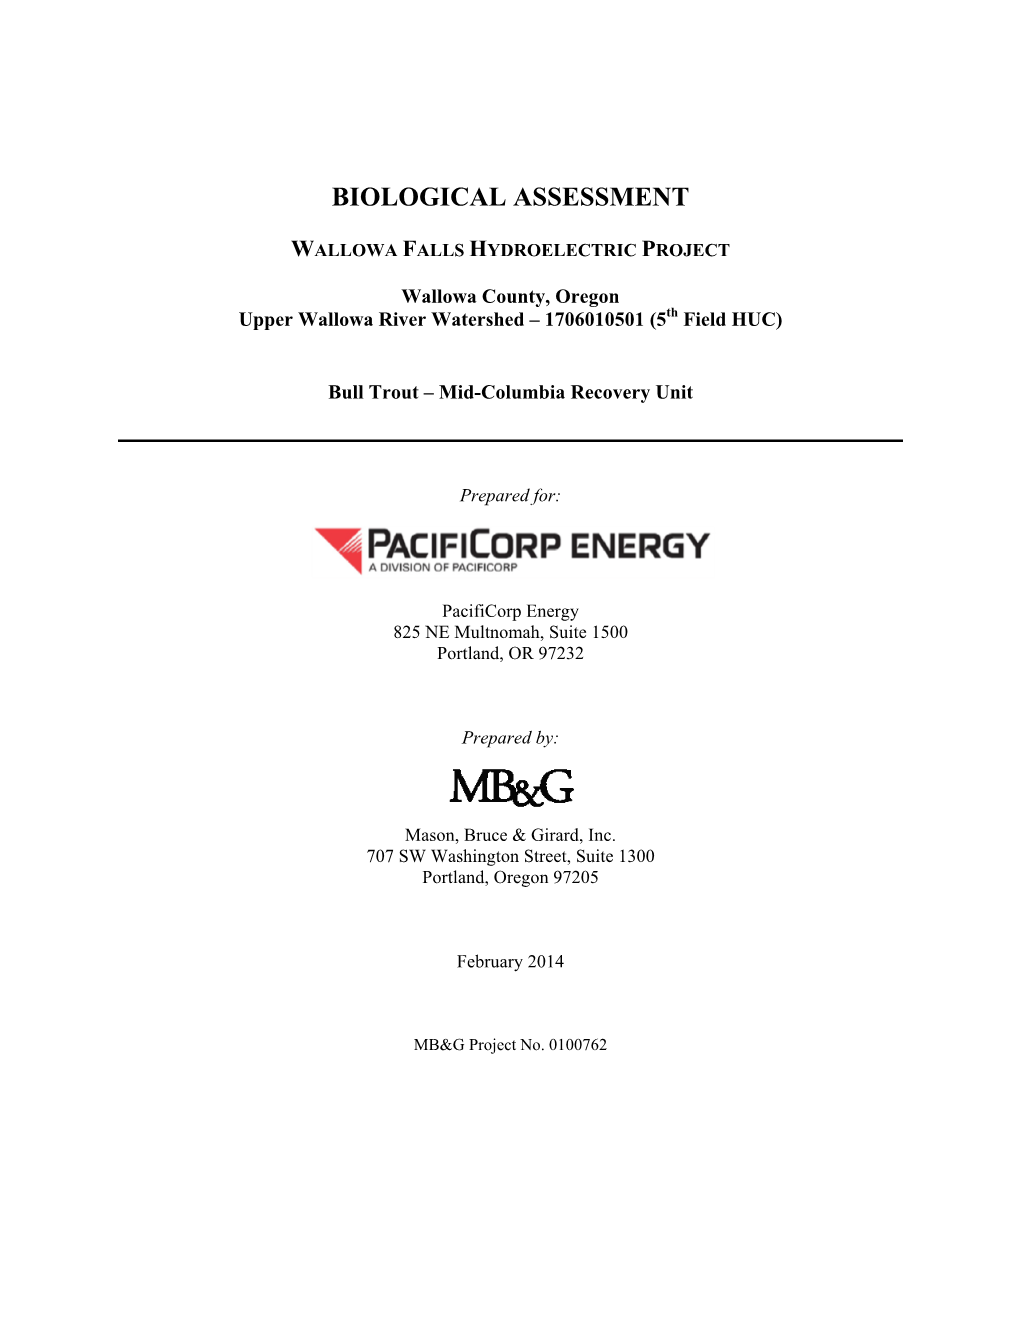 Pacificorp Biological Assessment for Bull Trout